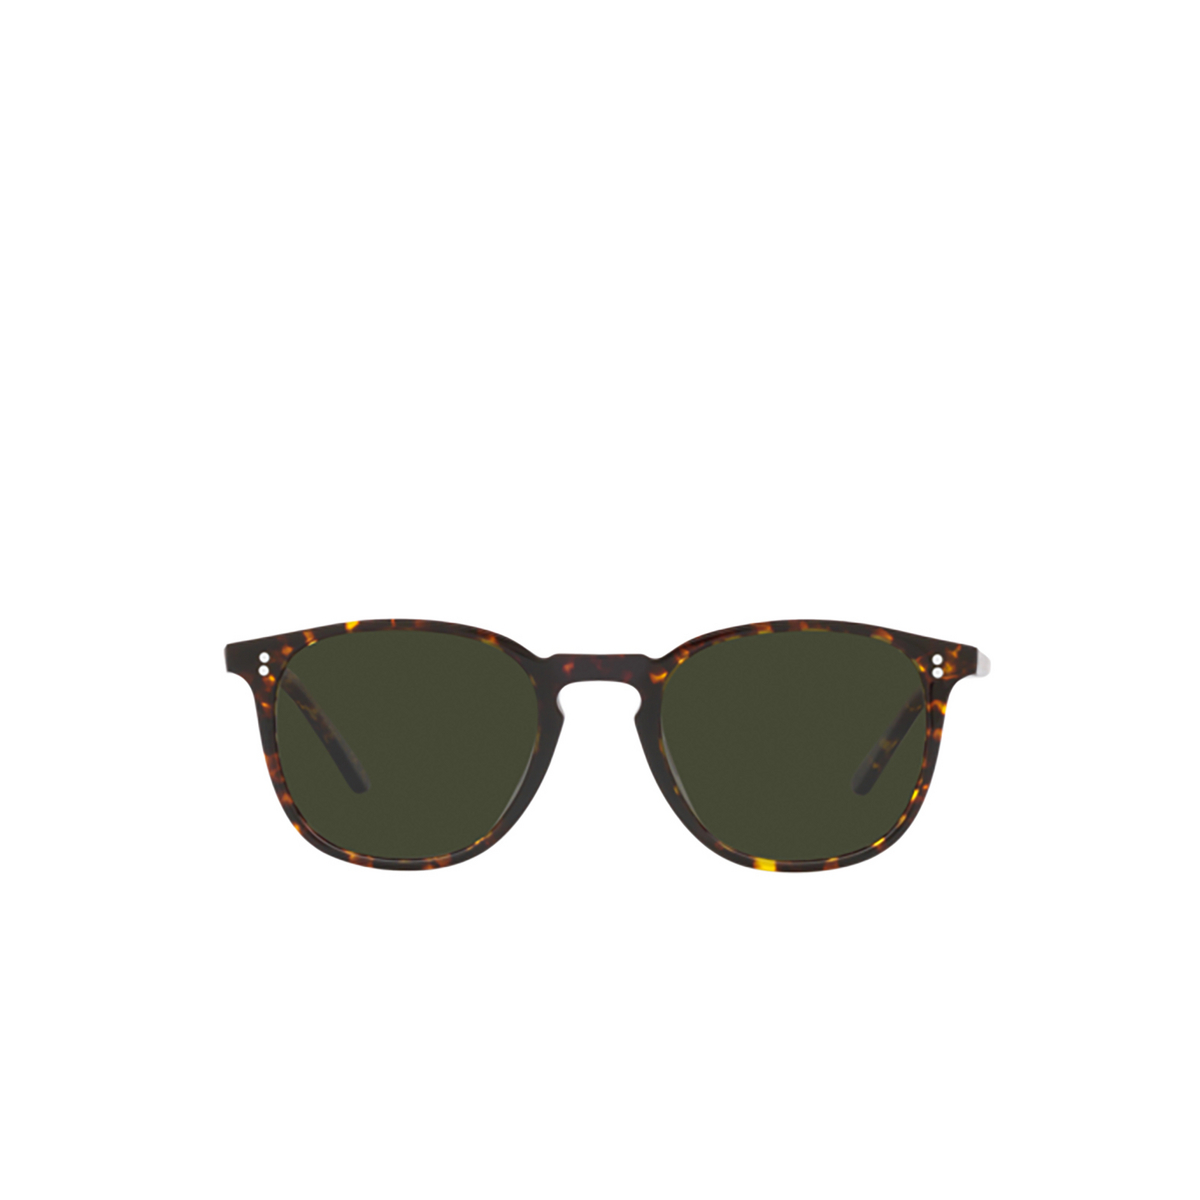 Oliver Peoples FINLEY 1993 Sunglasses 1743P1 Cherry Blossom - front view